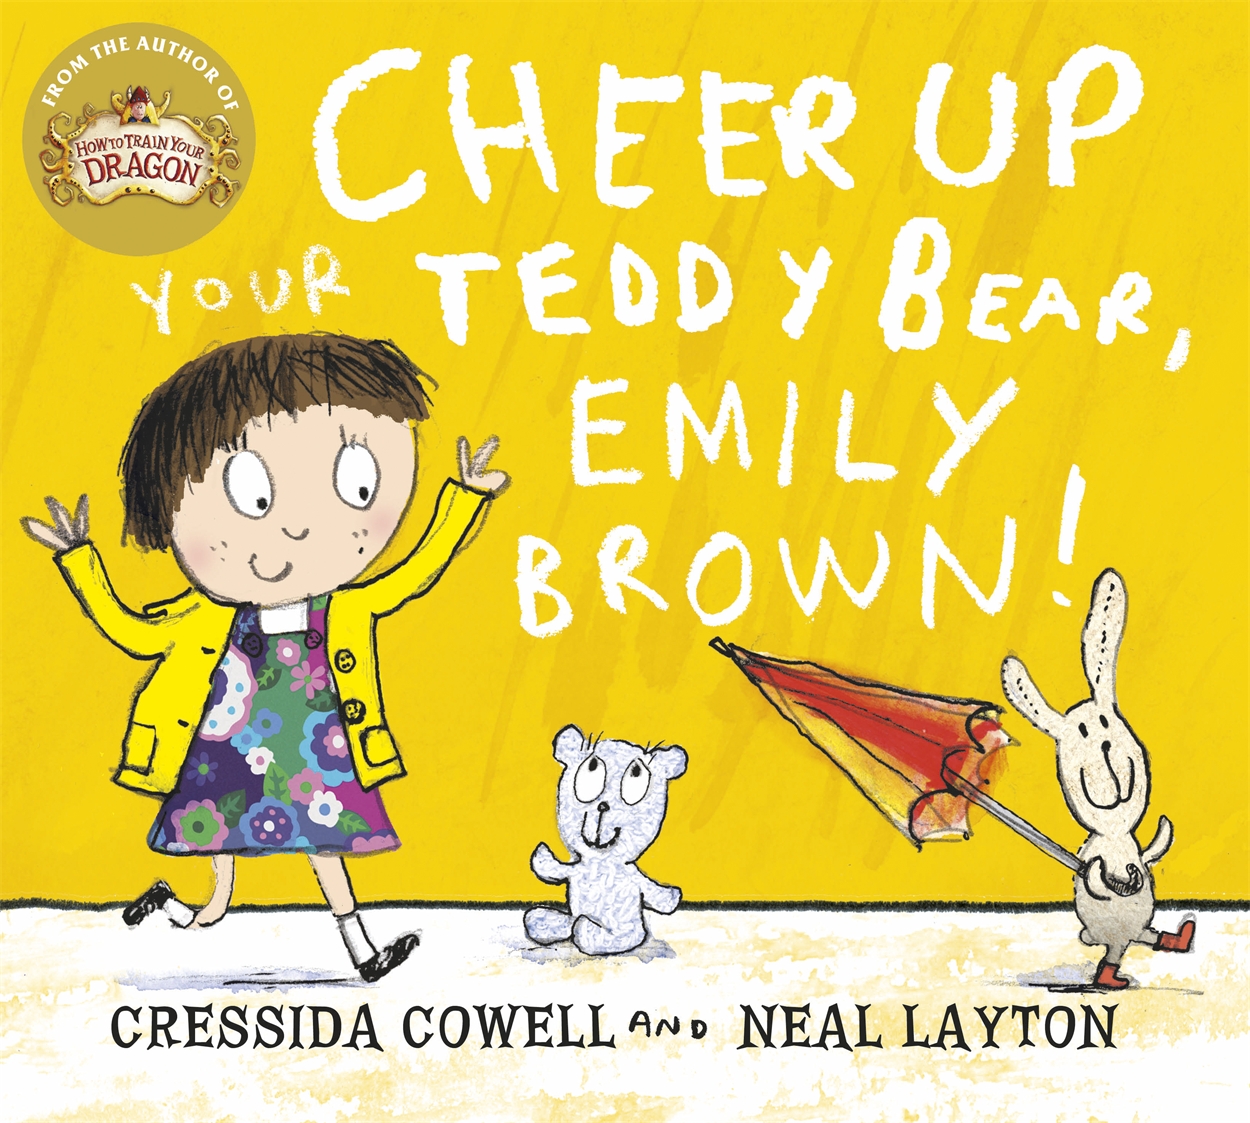 Cheer Up Your Teddy Emily Brown by Cressida Cowell | Hachette UK